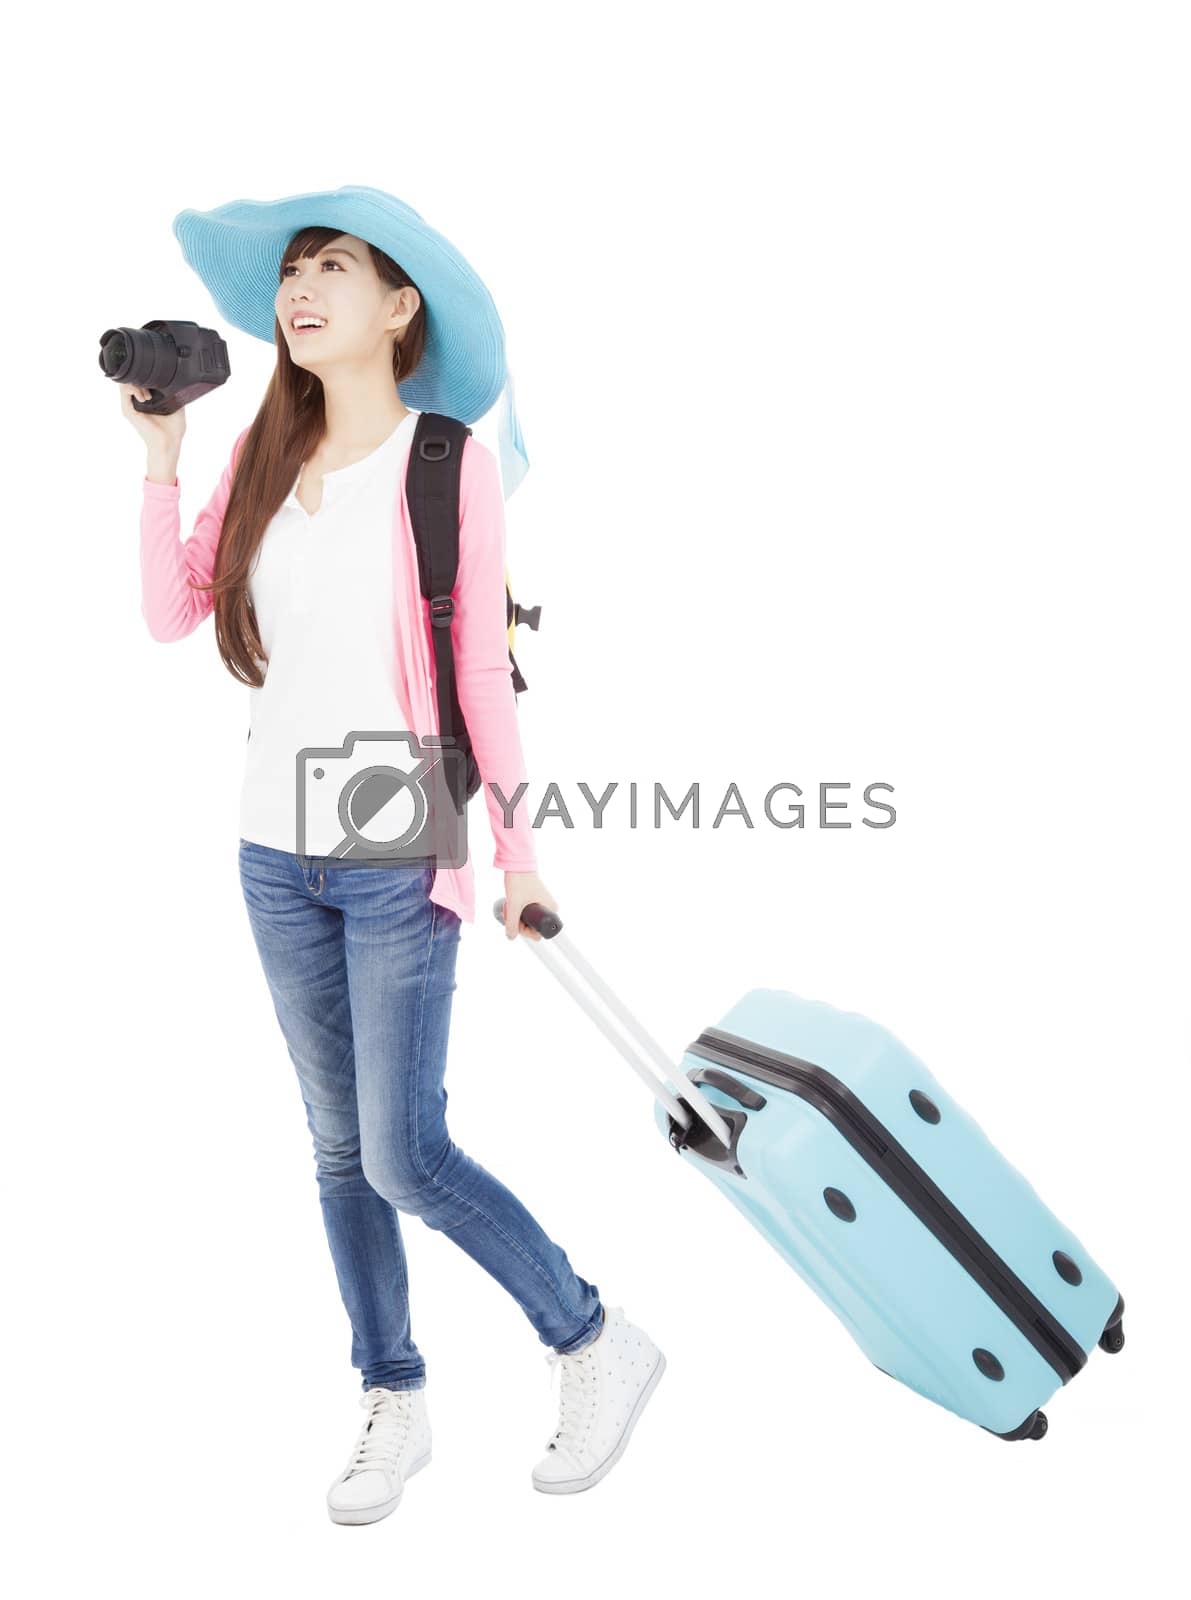 Royalty free image of young woman holding traveling case and camera by tomwang